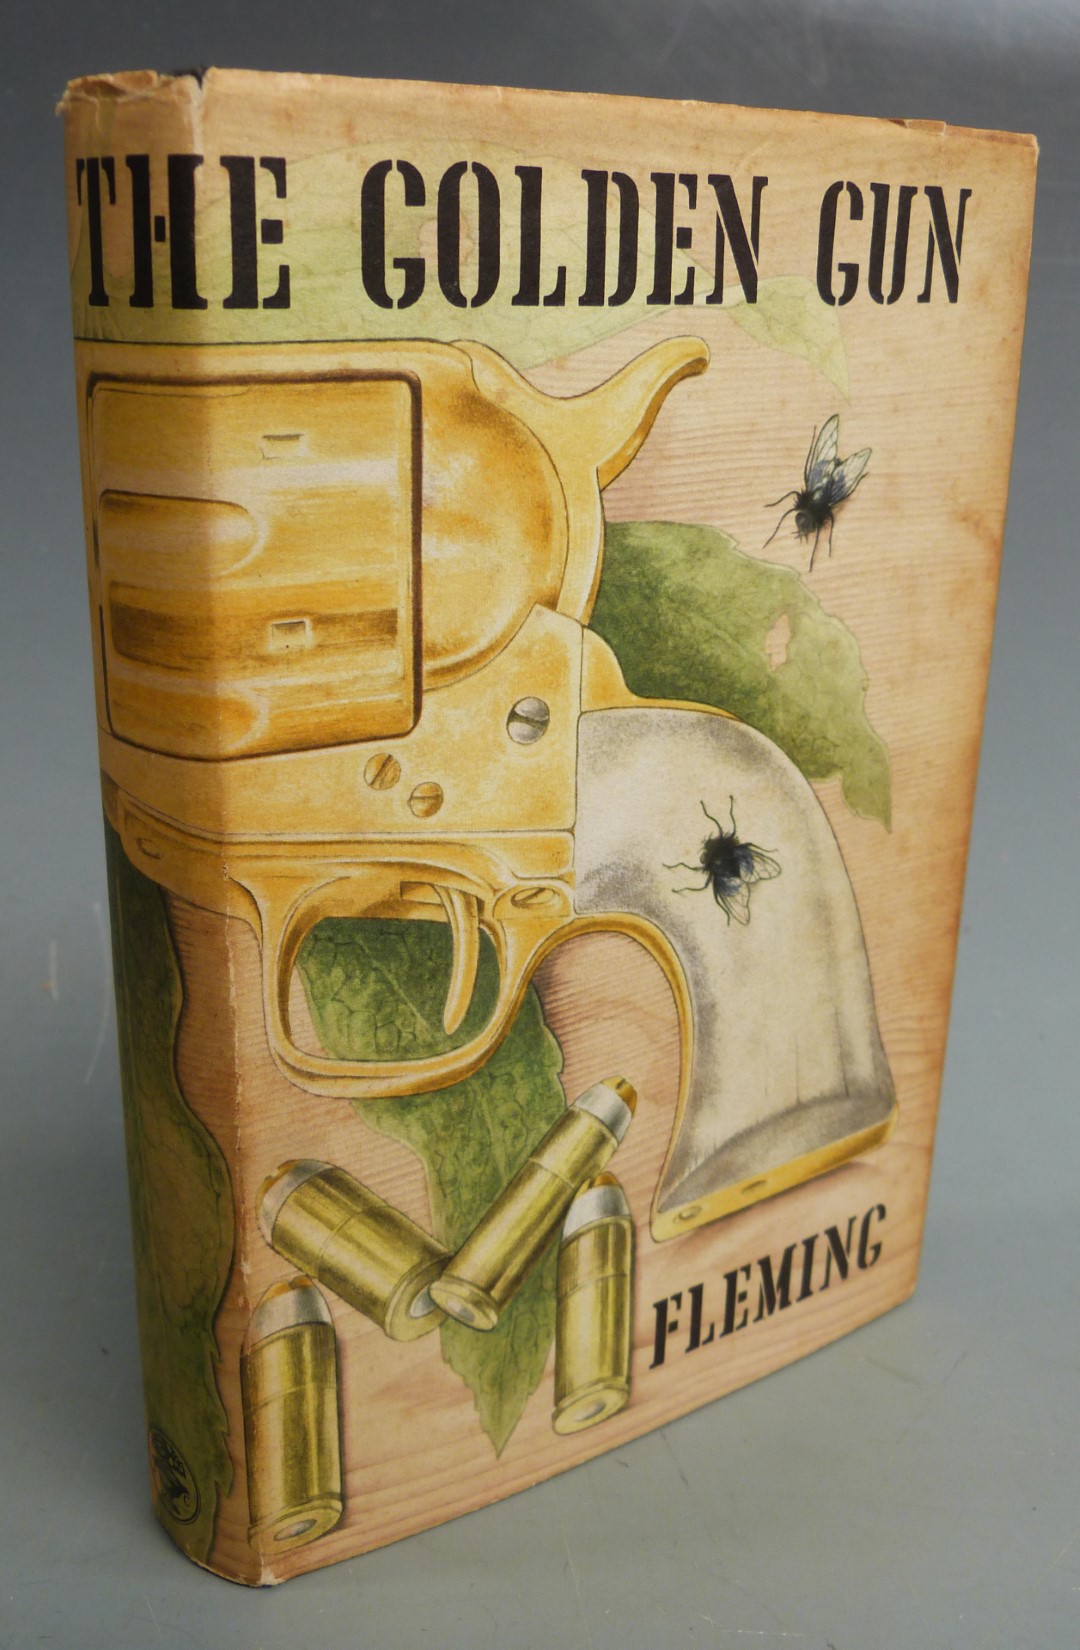 [James Bond] The Man with the Golden Gun by Ian Fleming published Jonathan Cape 1965 first edition - Image 4 of 4